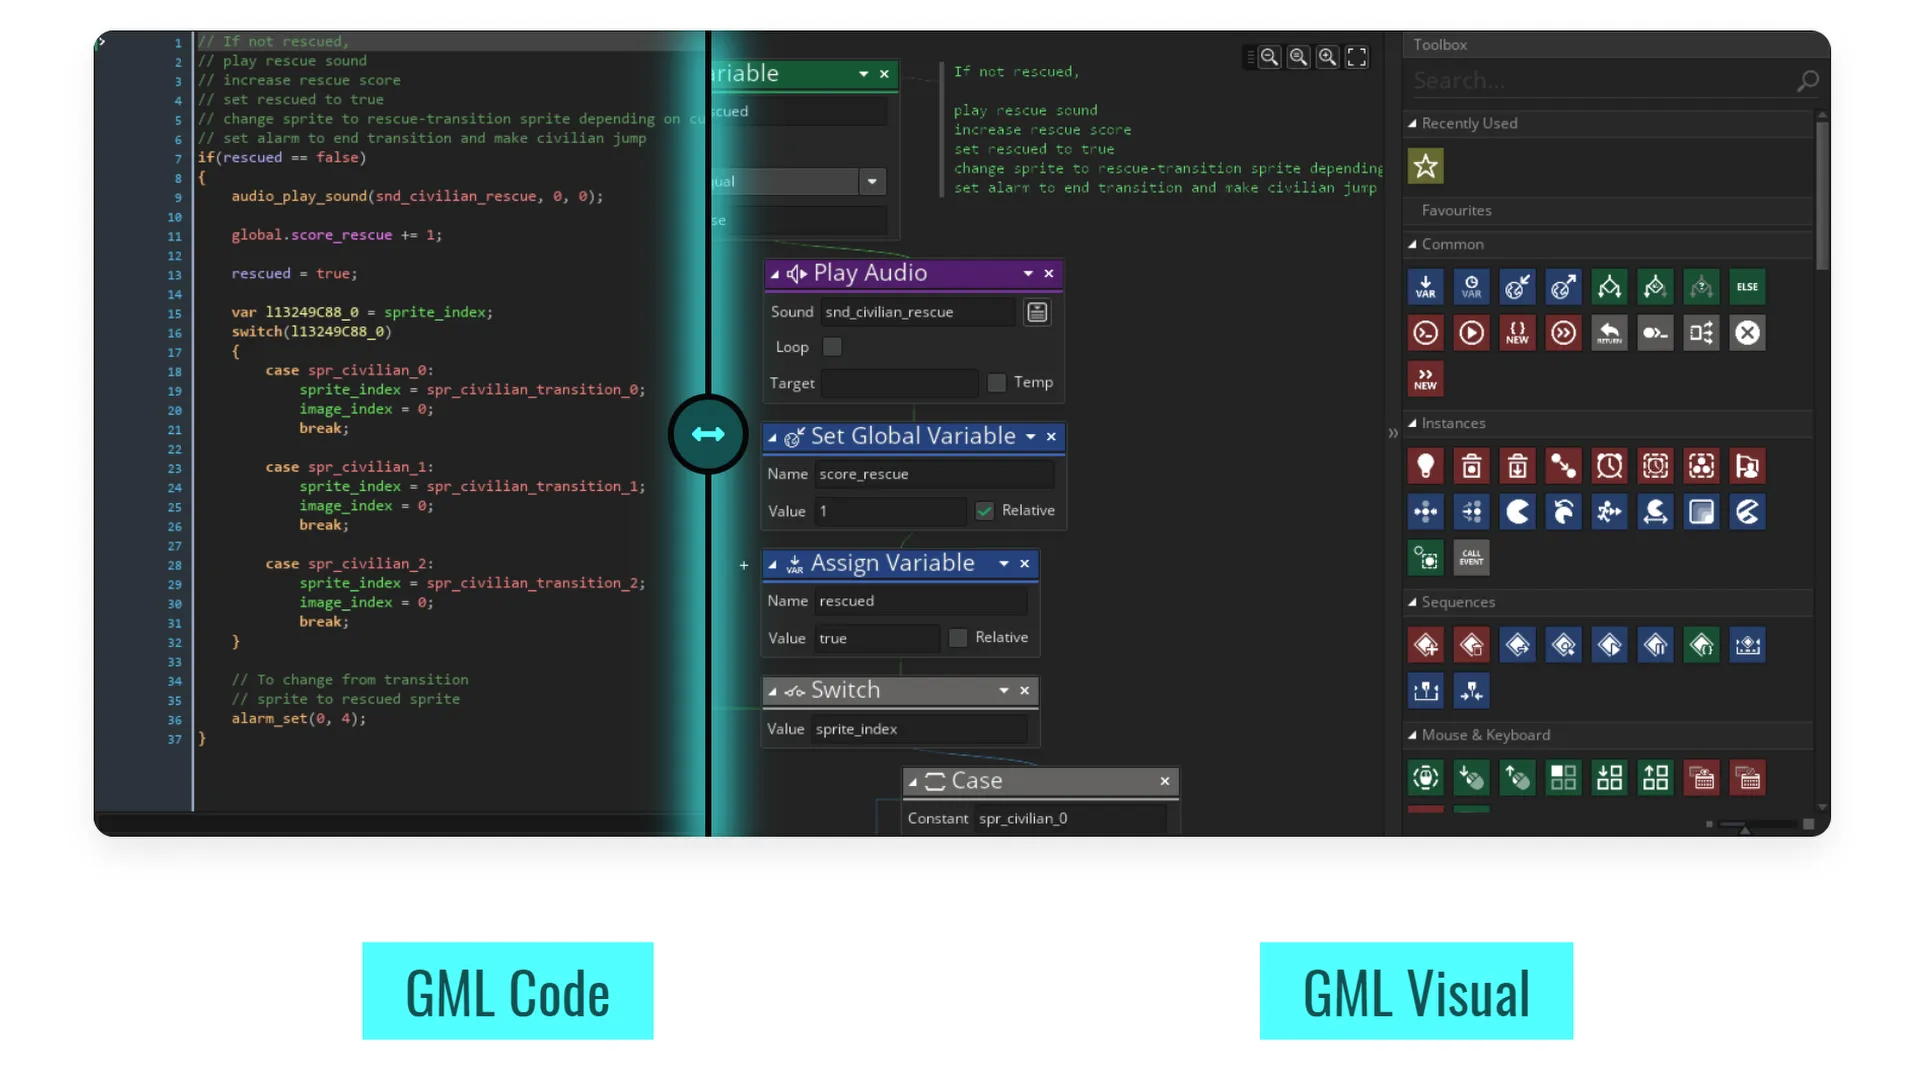 GameMaker has programming languages for both text and visual